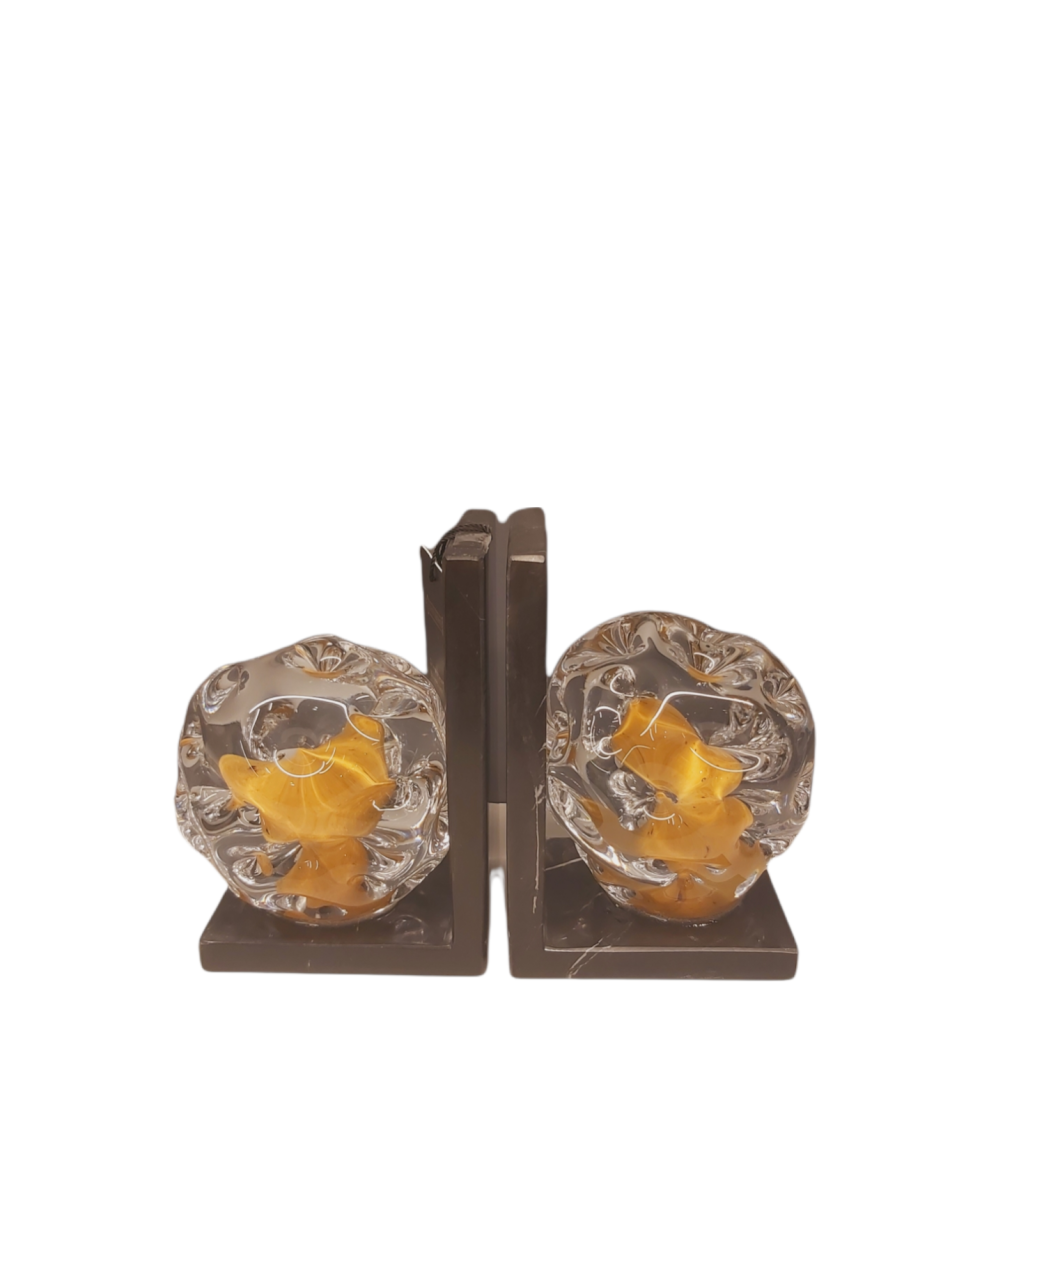 BOOK HOLDER WITH GLASS BALL AMBER